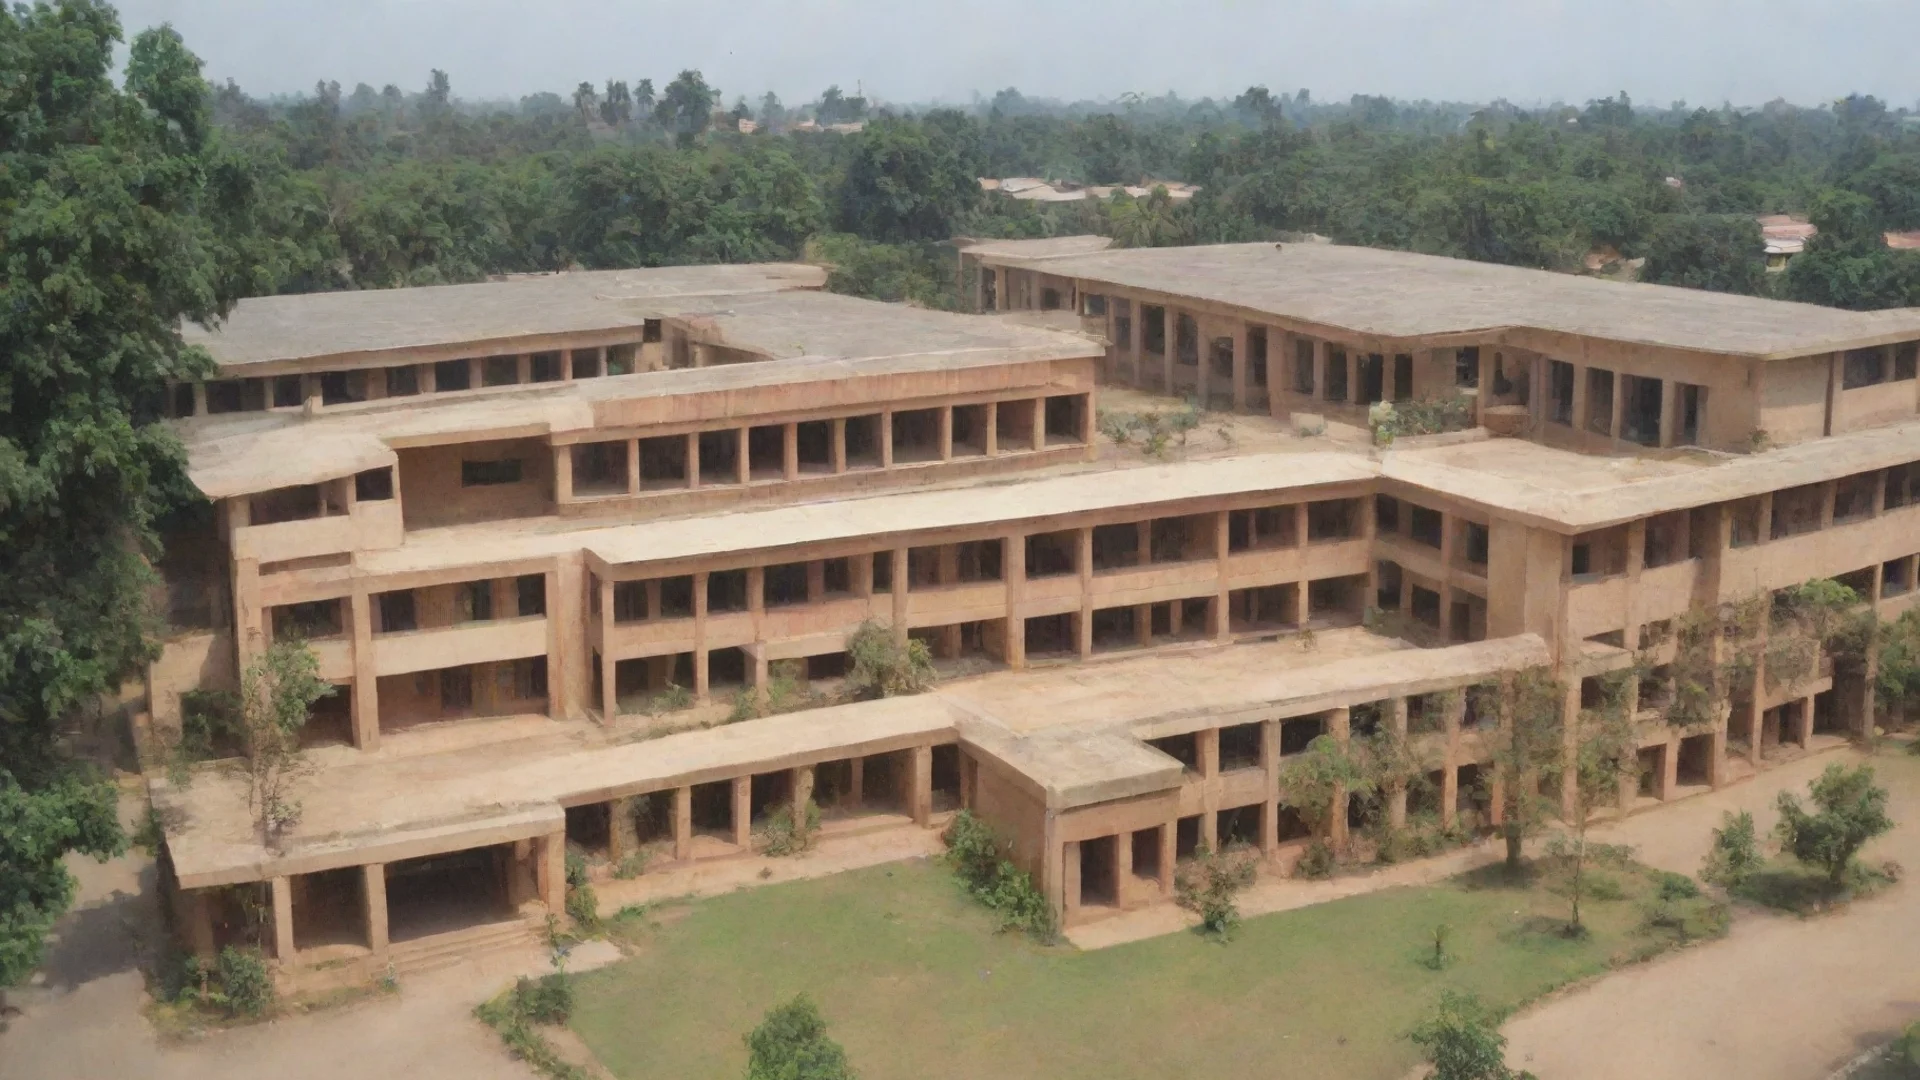 modern school of higher education has around 2000 students and three departments. the students belong to various departments in the school. every department has a head of department along with teach